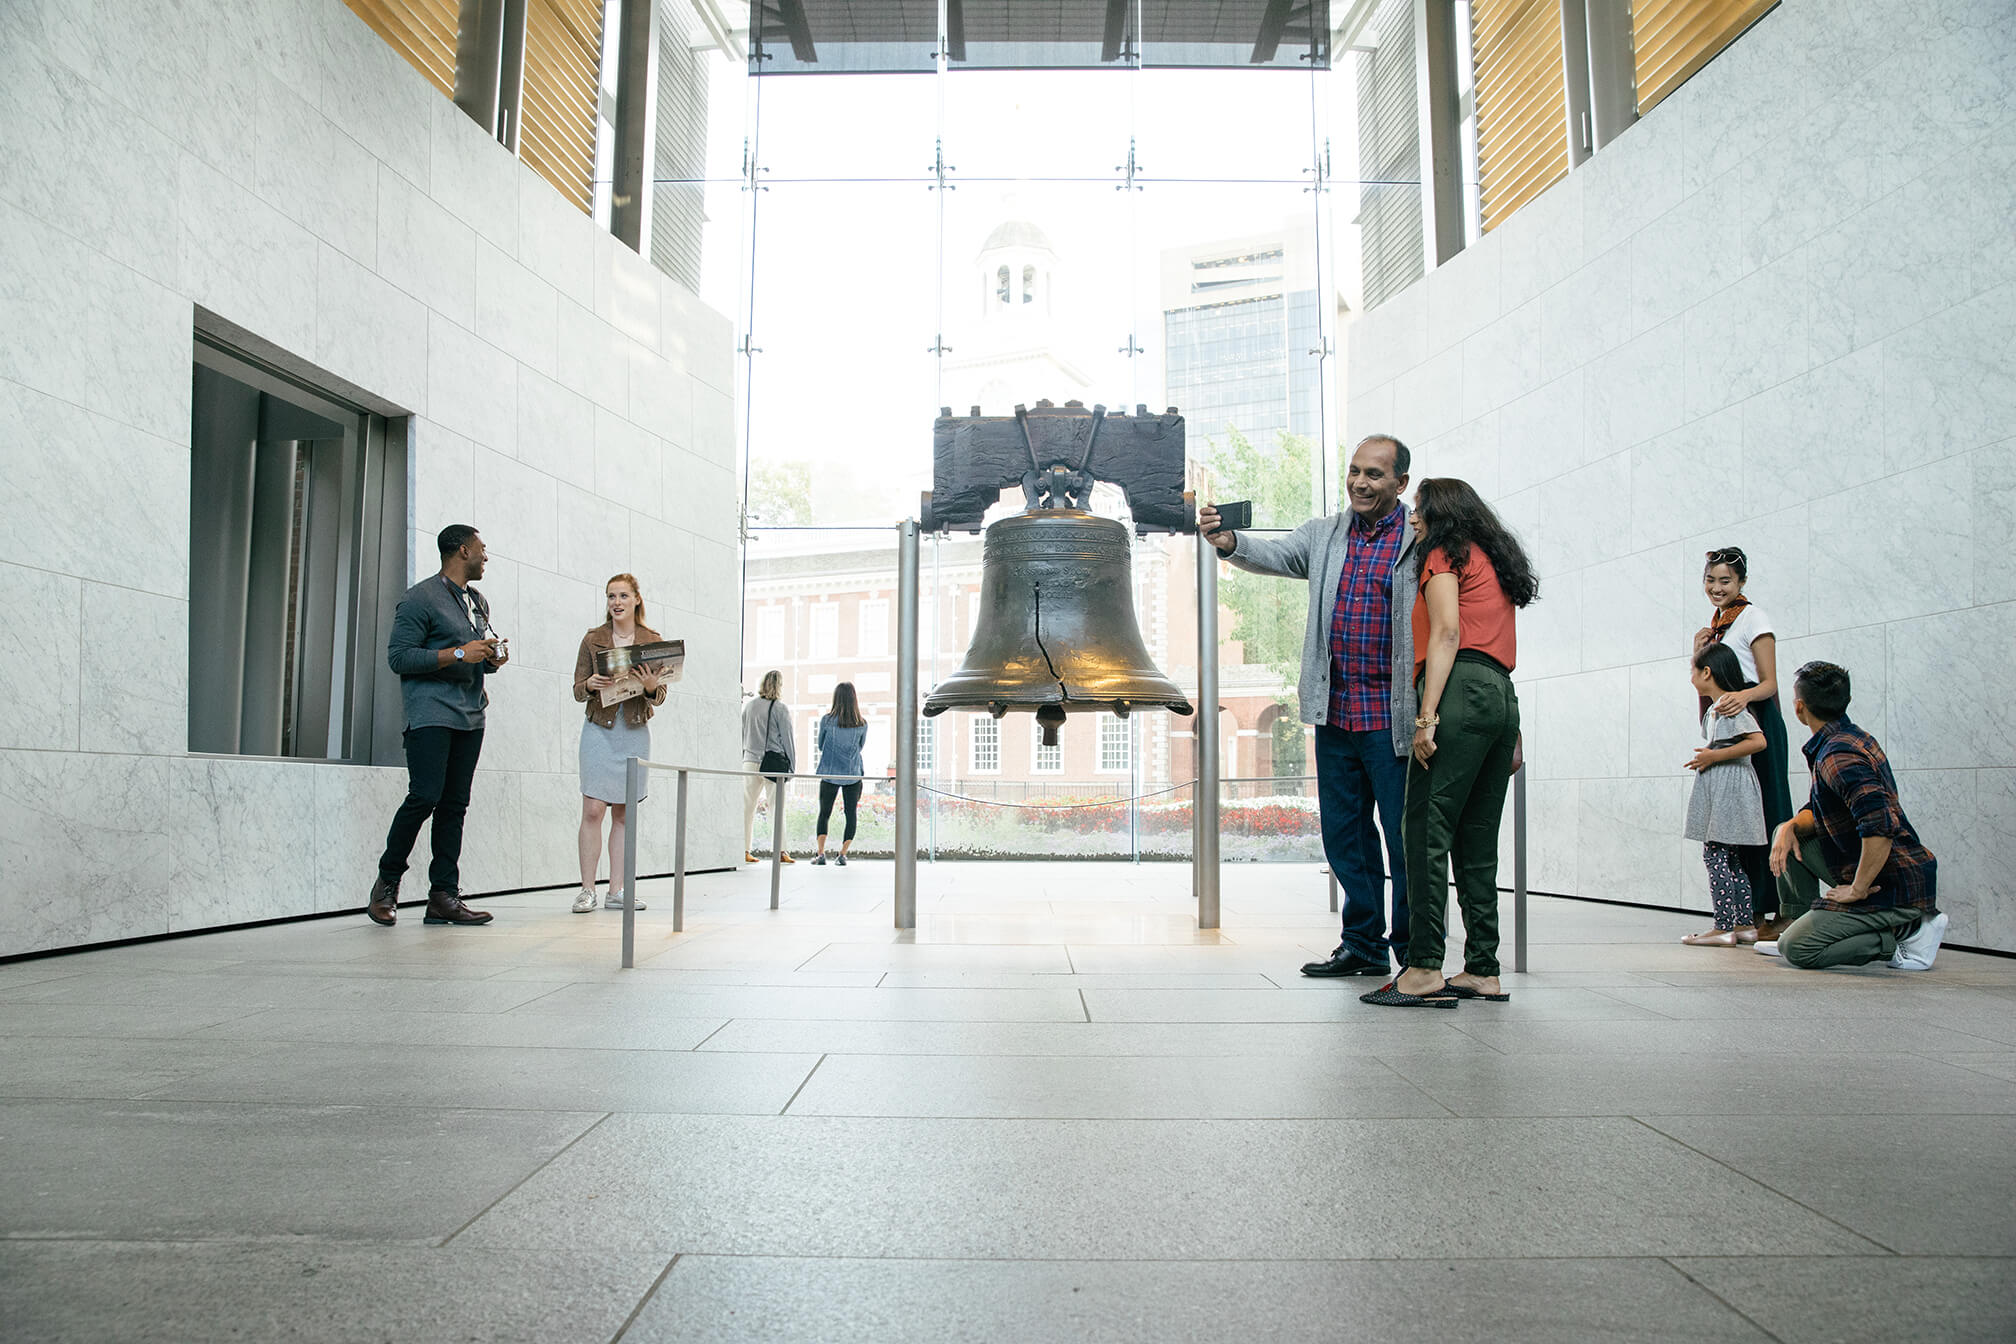 A group touring the Liberty Bell in Philadelphia.